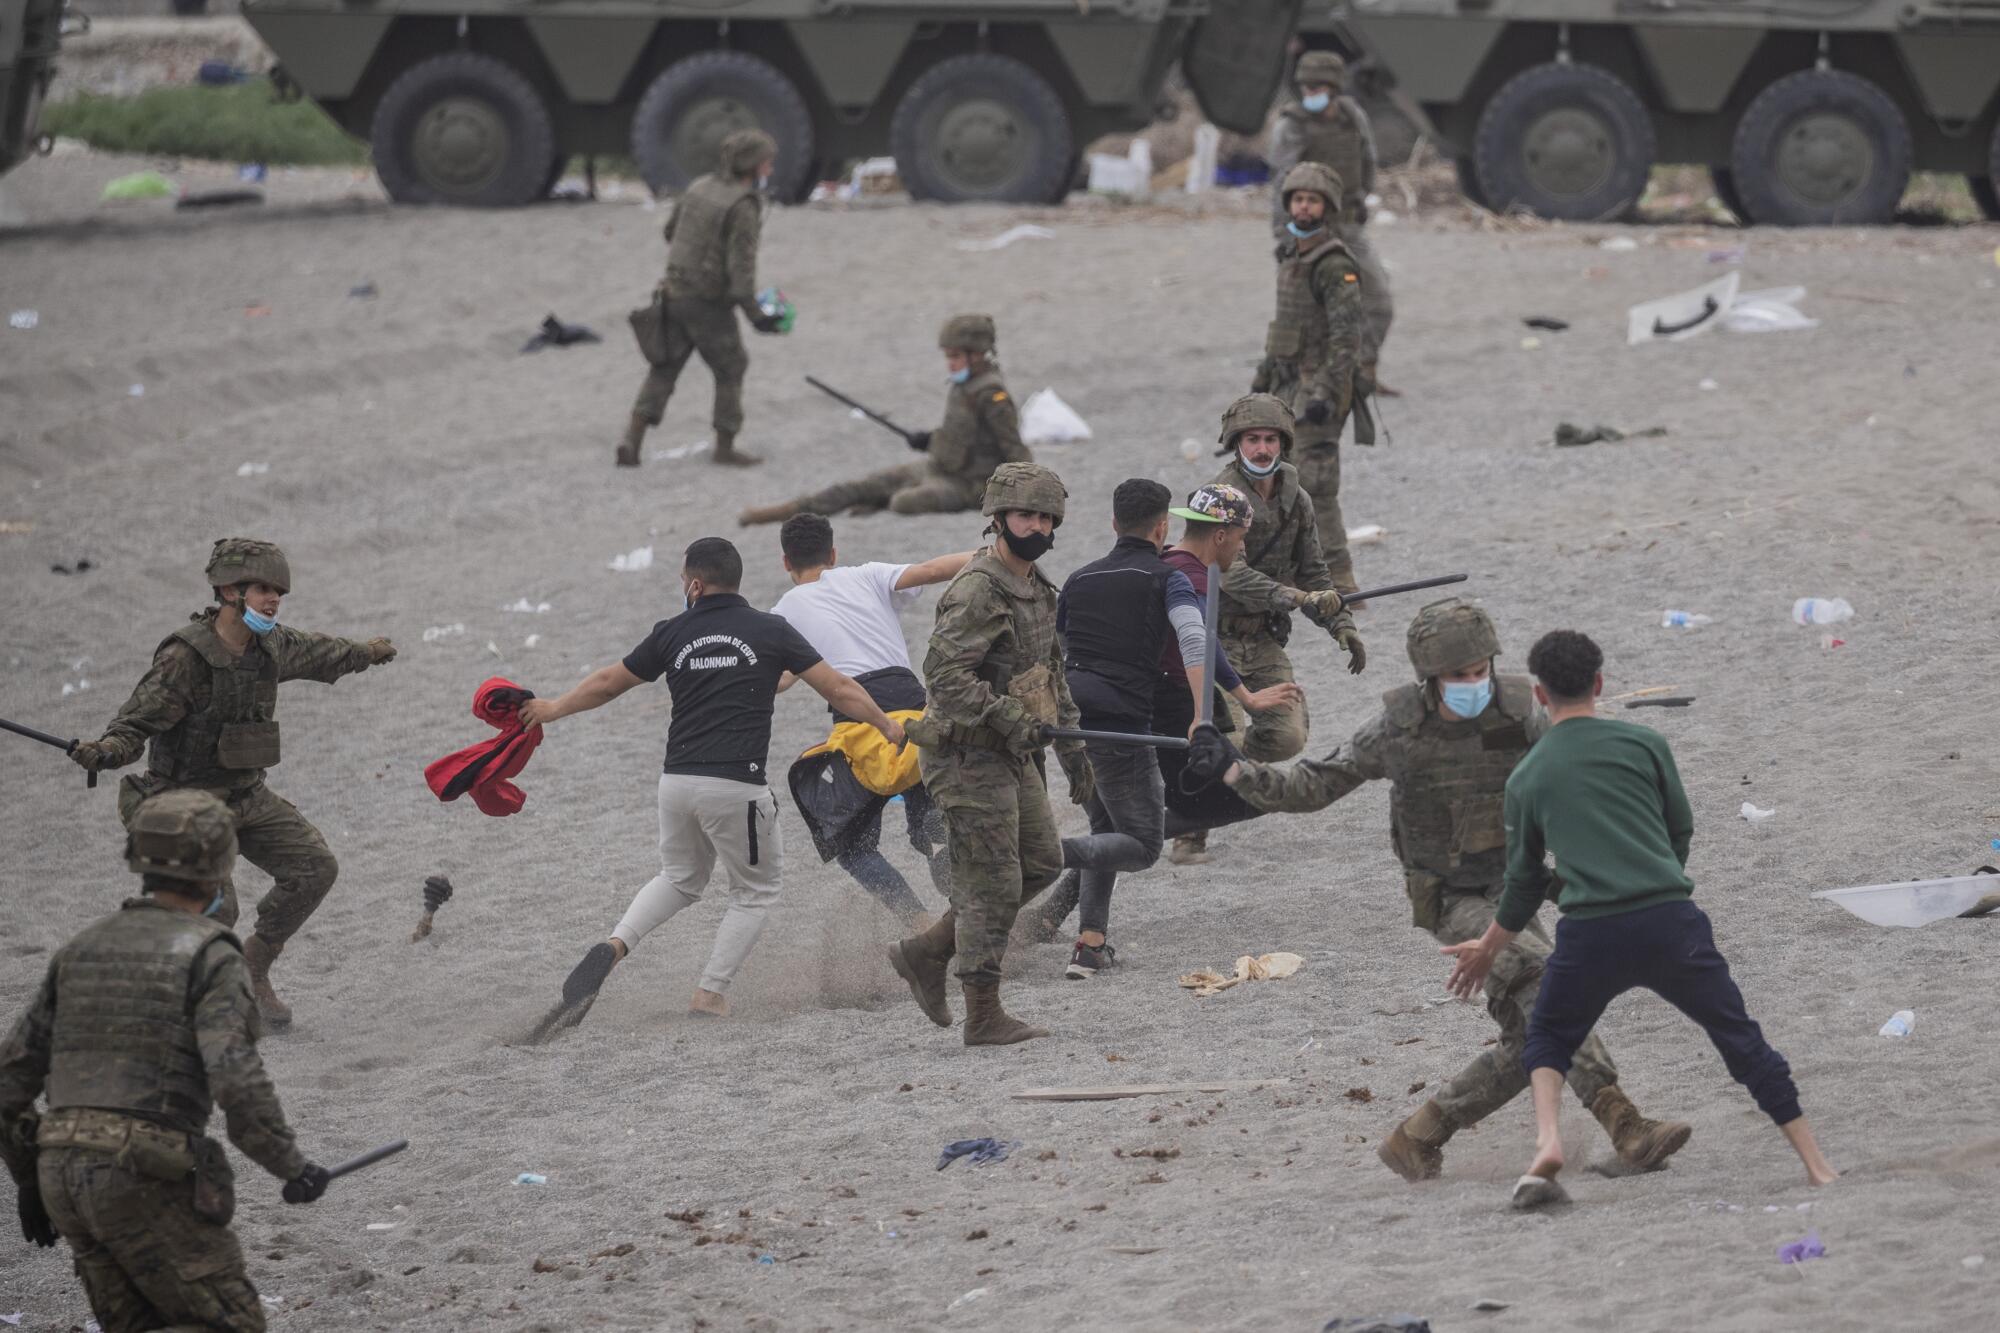 A group of soldiers fight with batons against five young male migrants on a beach